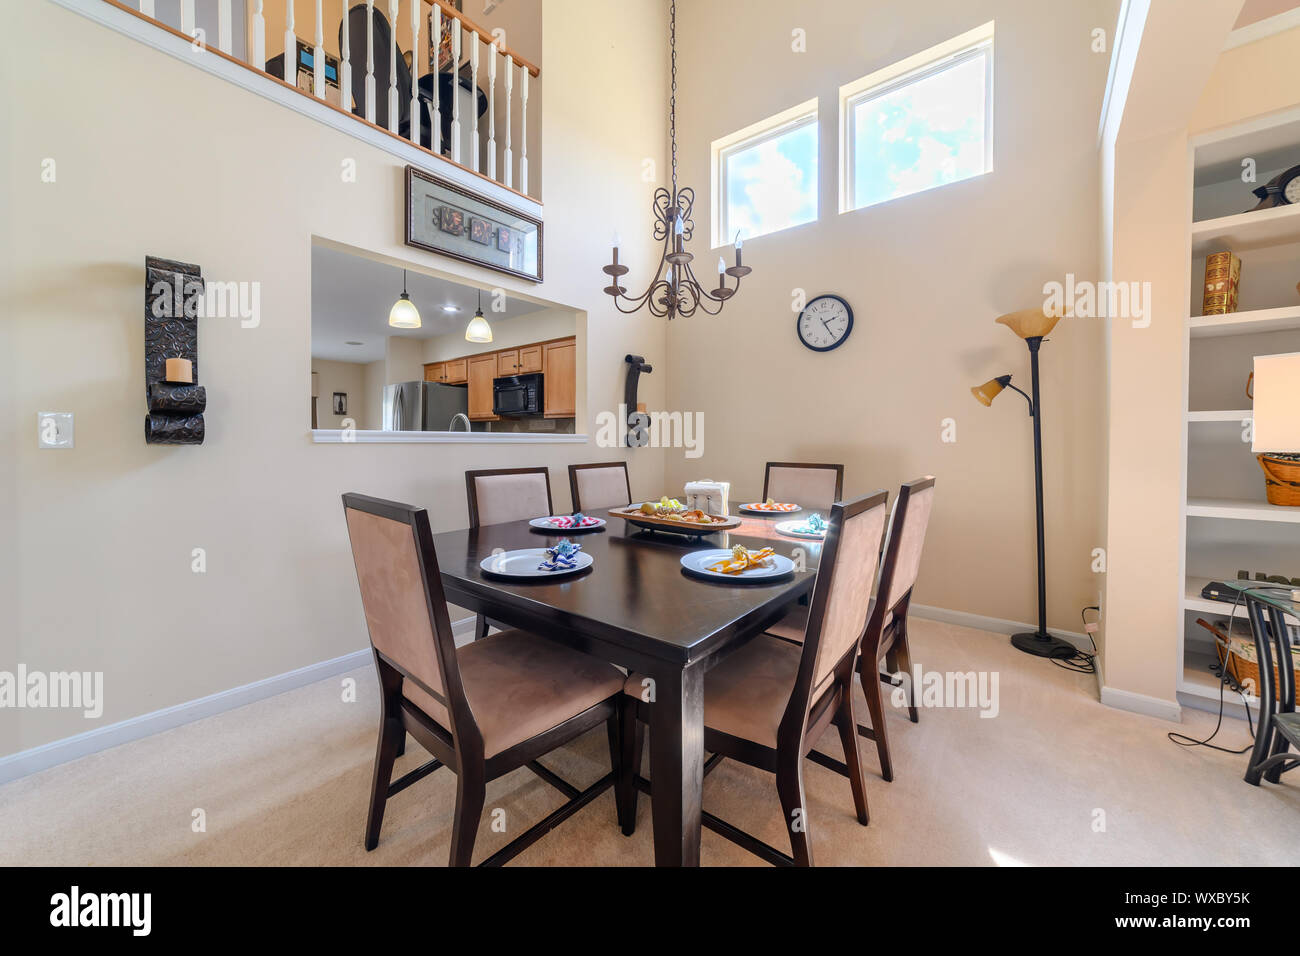 A kitchen in a suburban American home with a partially set table. Stock Photo